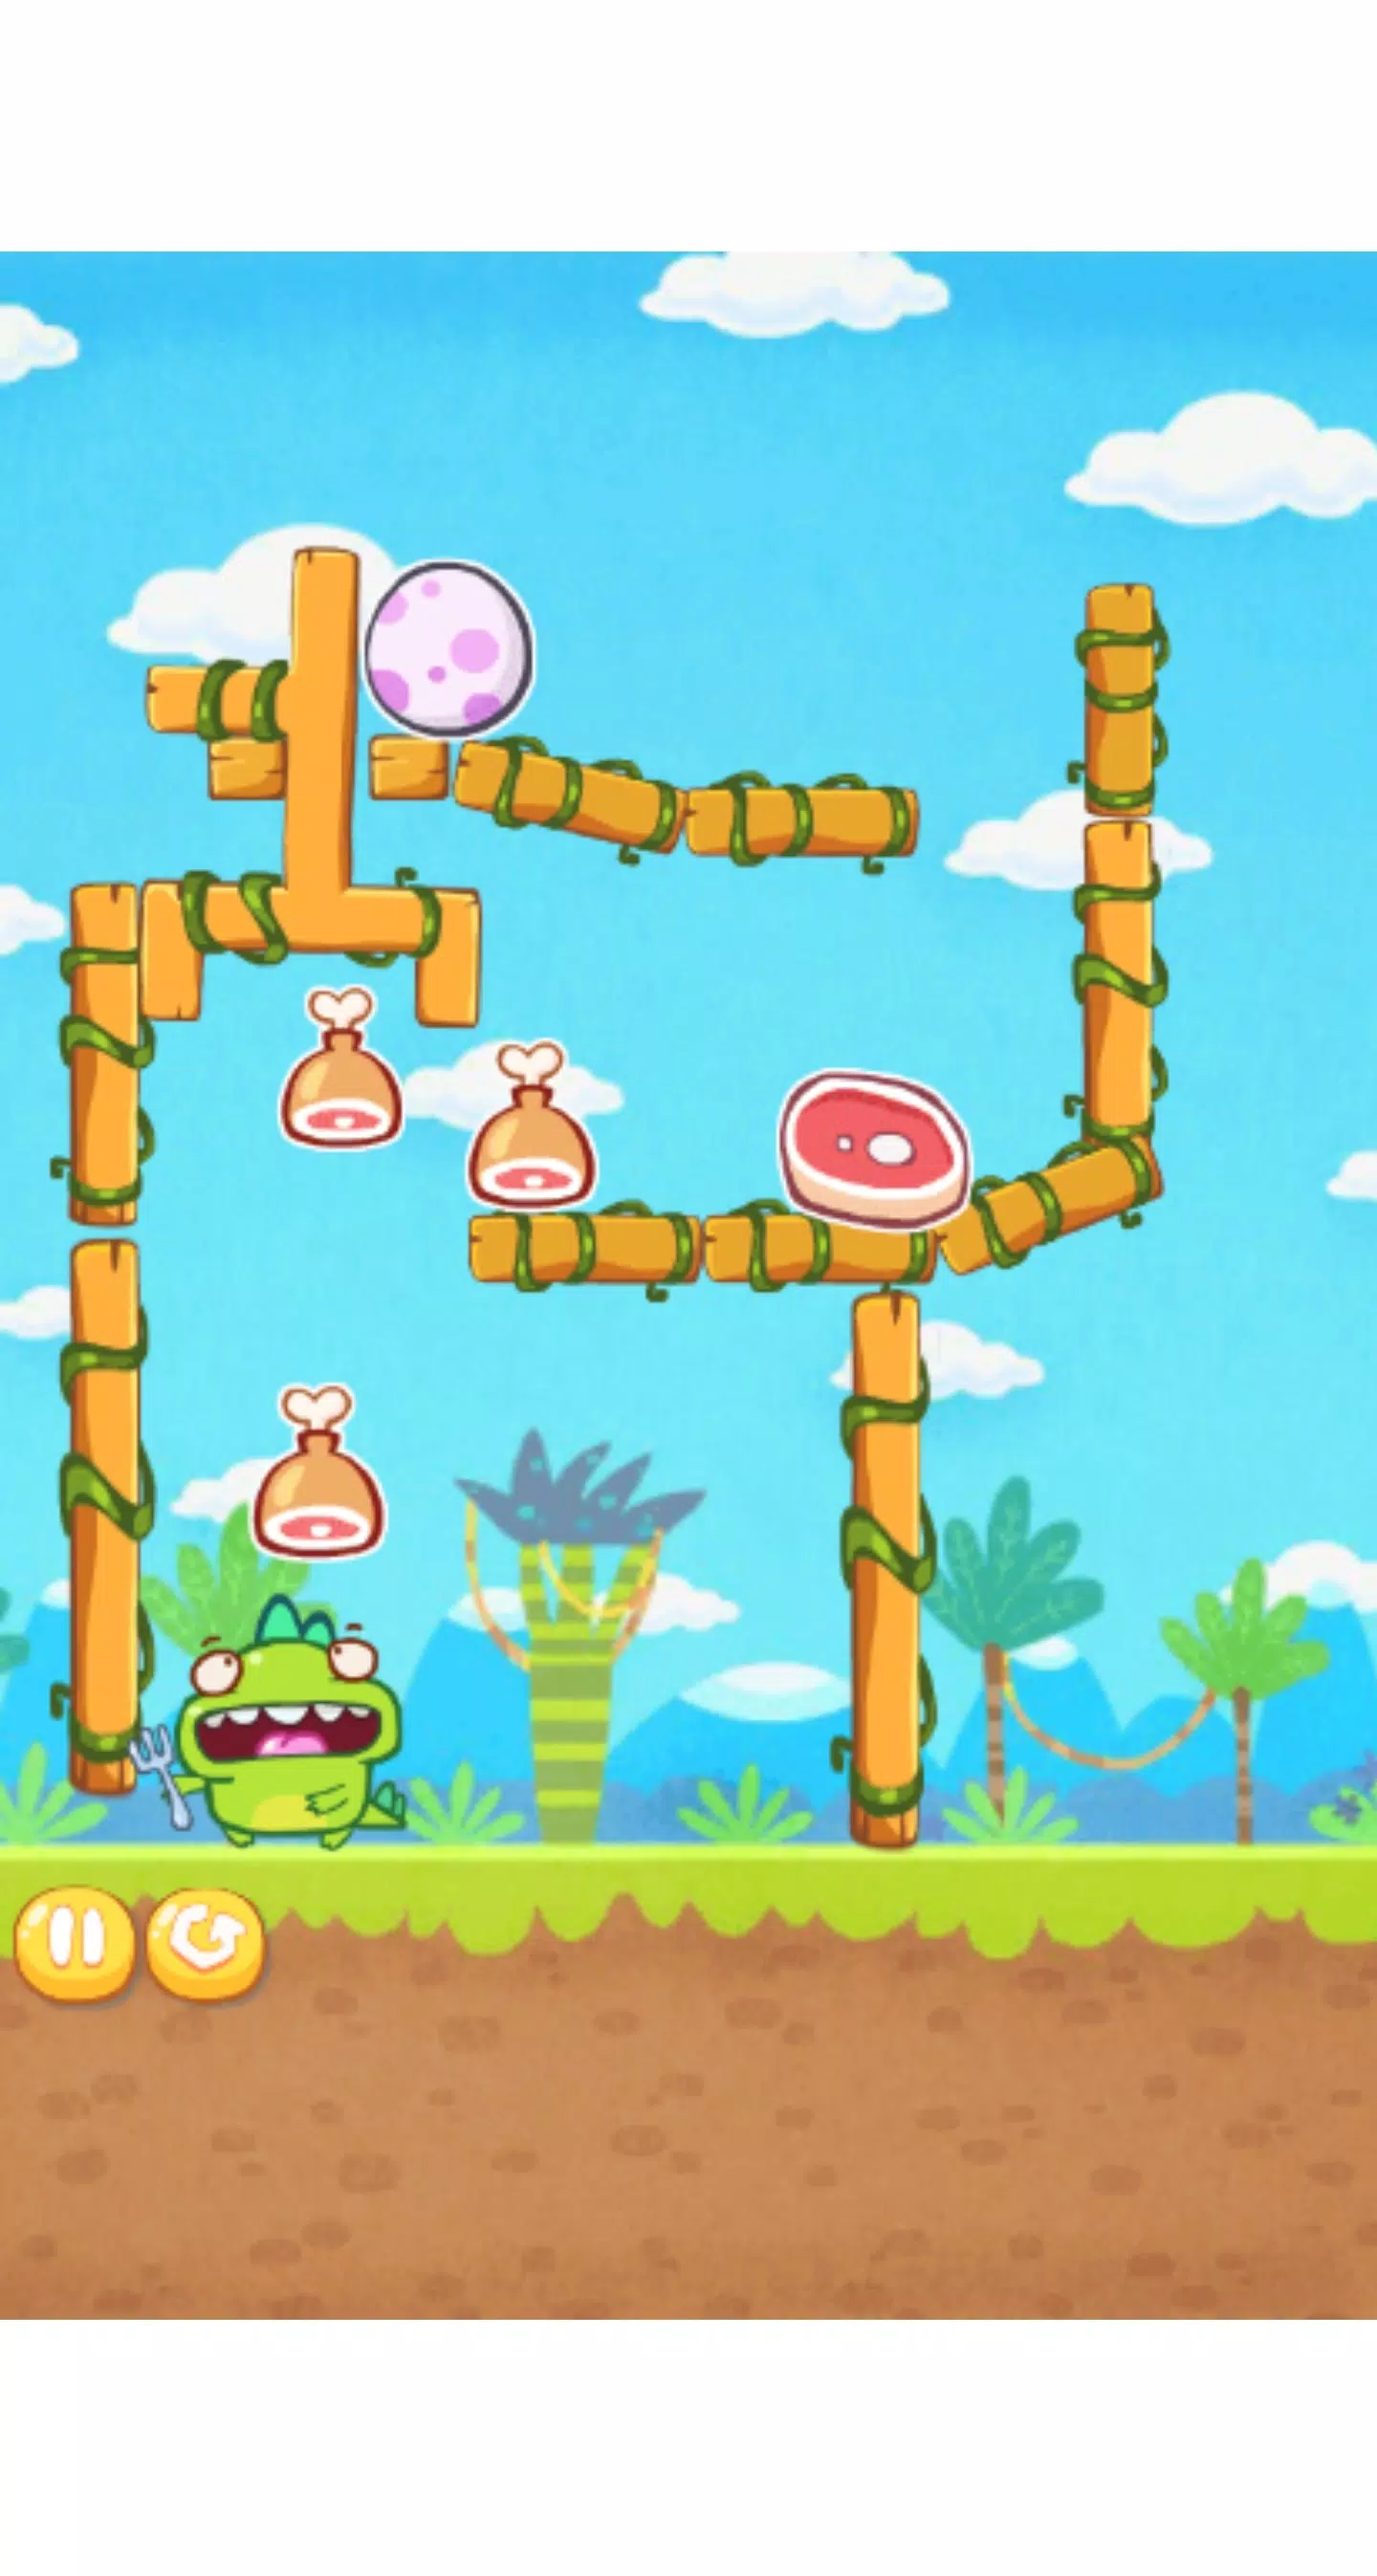 PigXU - 1001 Games in One APK for Android Download